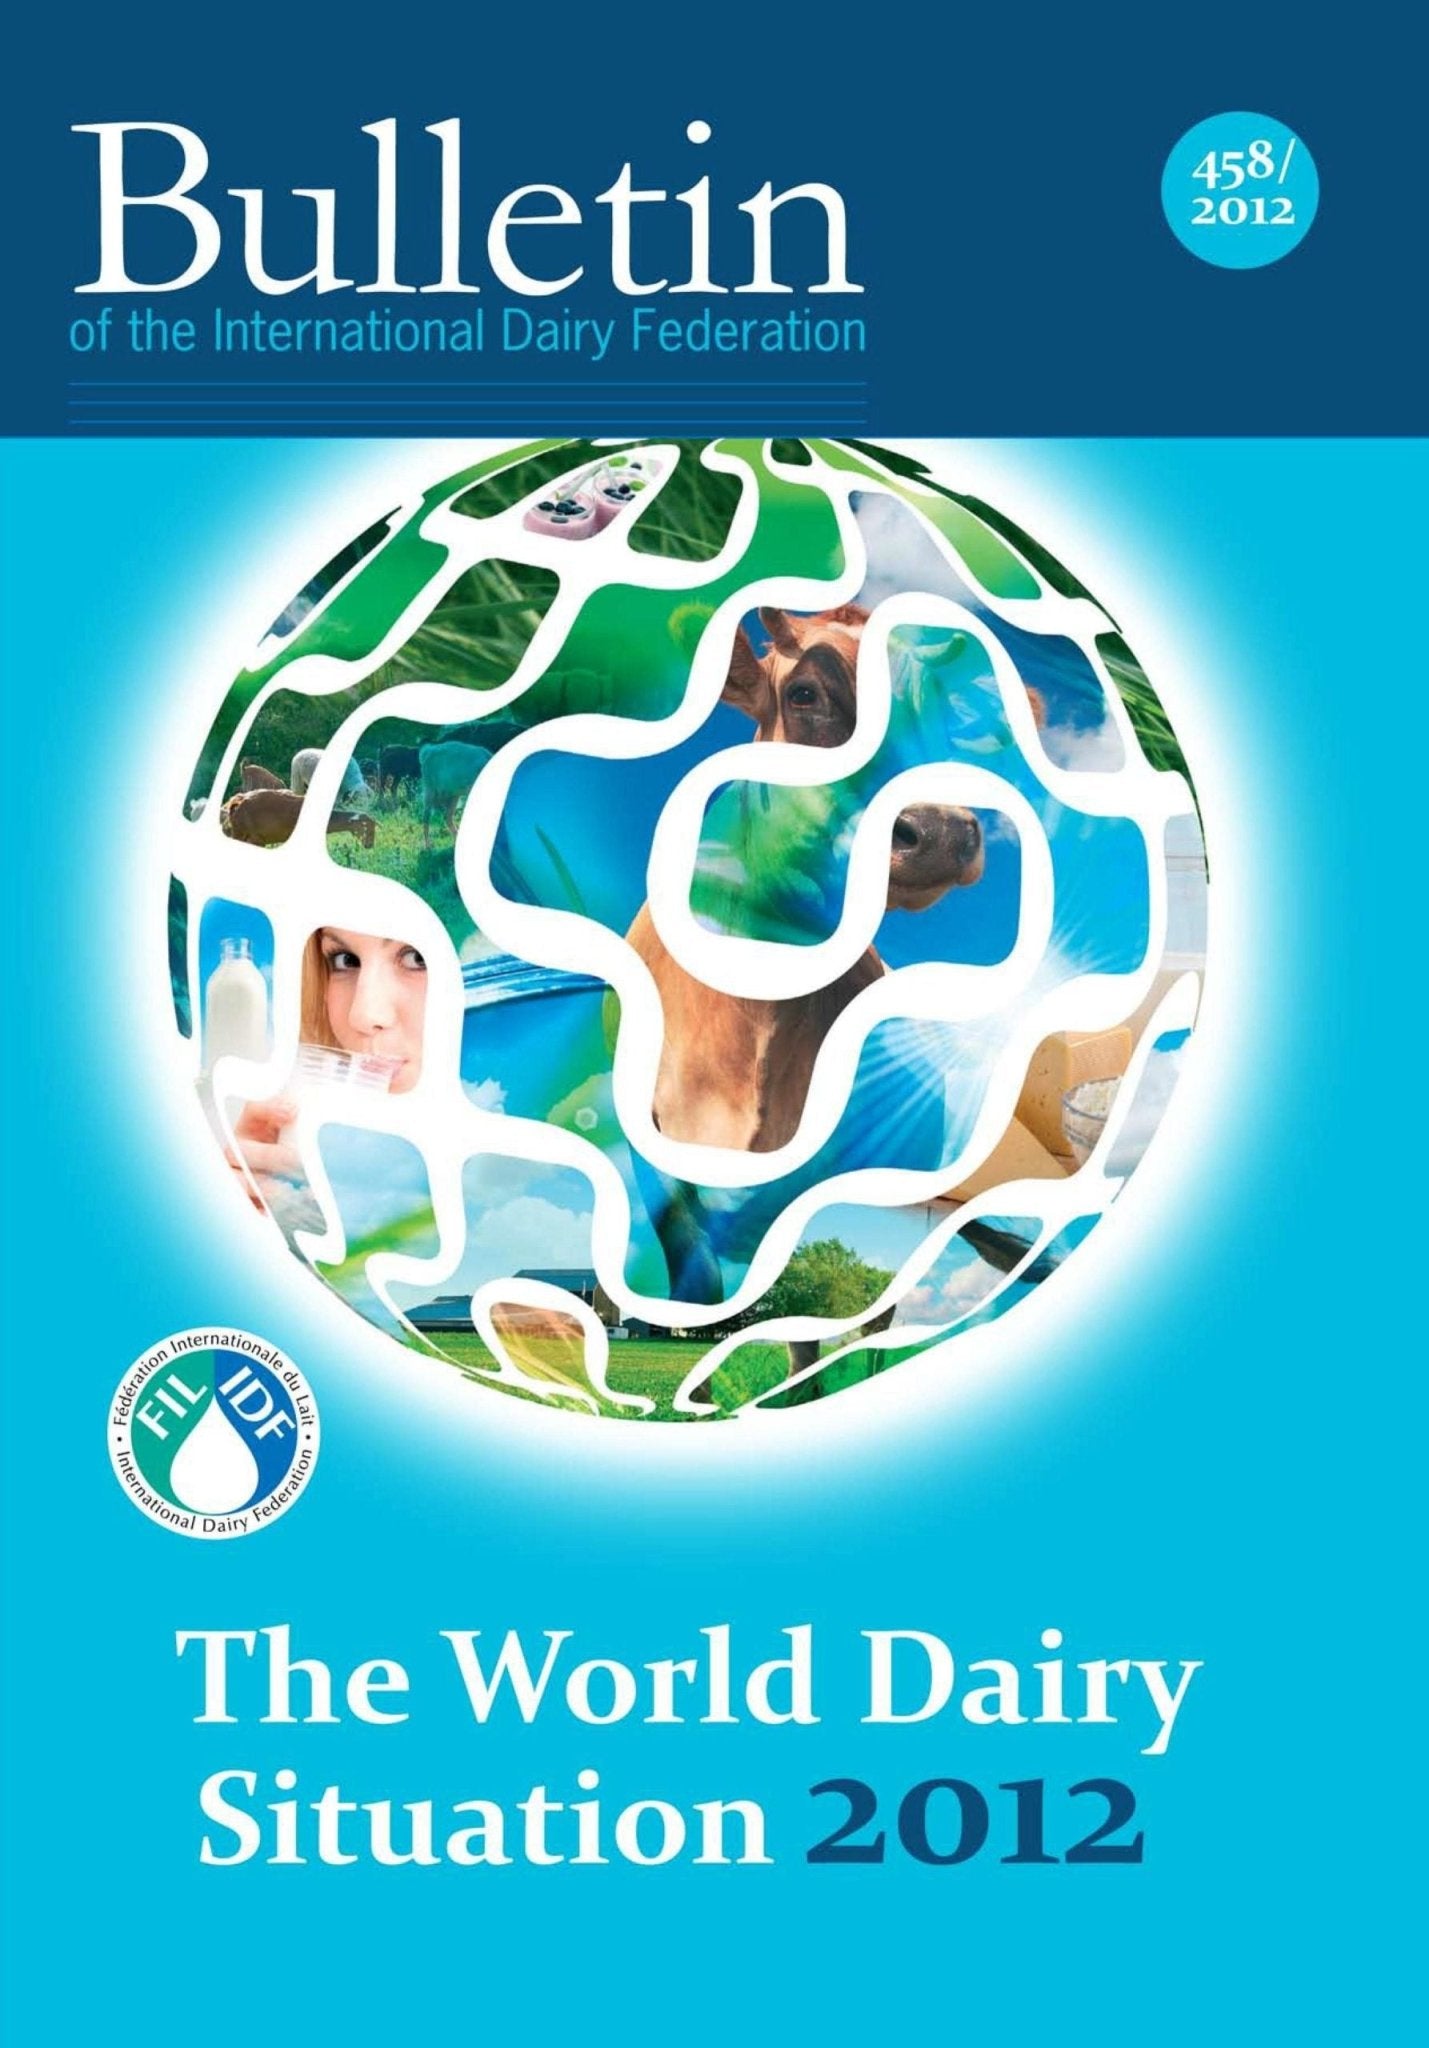 Bulletin of the IDF N° 458/ 2012: The World Dairy Situation 2012 - FIL-IDF